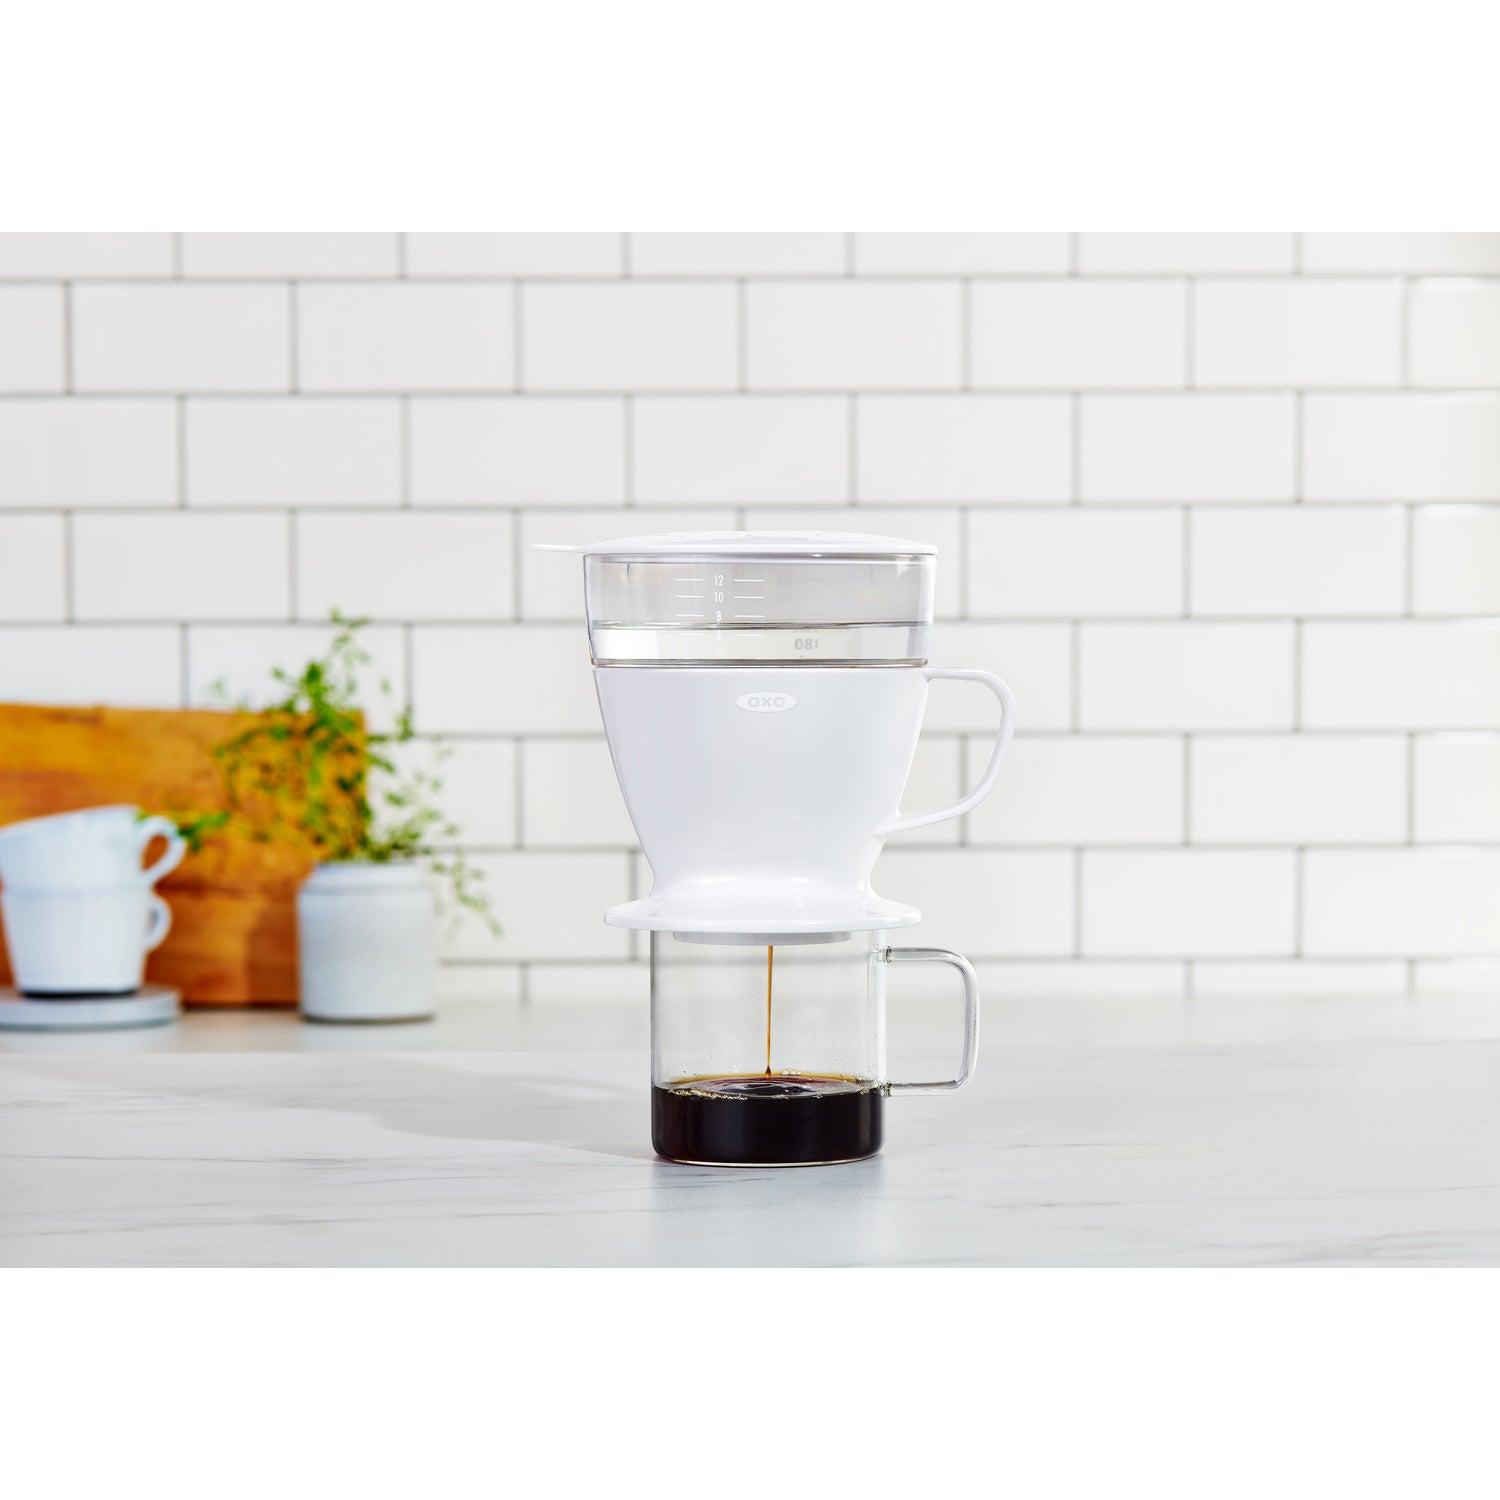 OXO Brew Single Serve Pour Over Review: In Search of a Good Cup